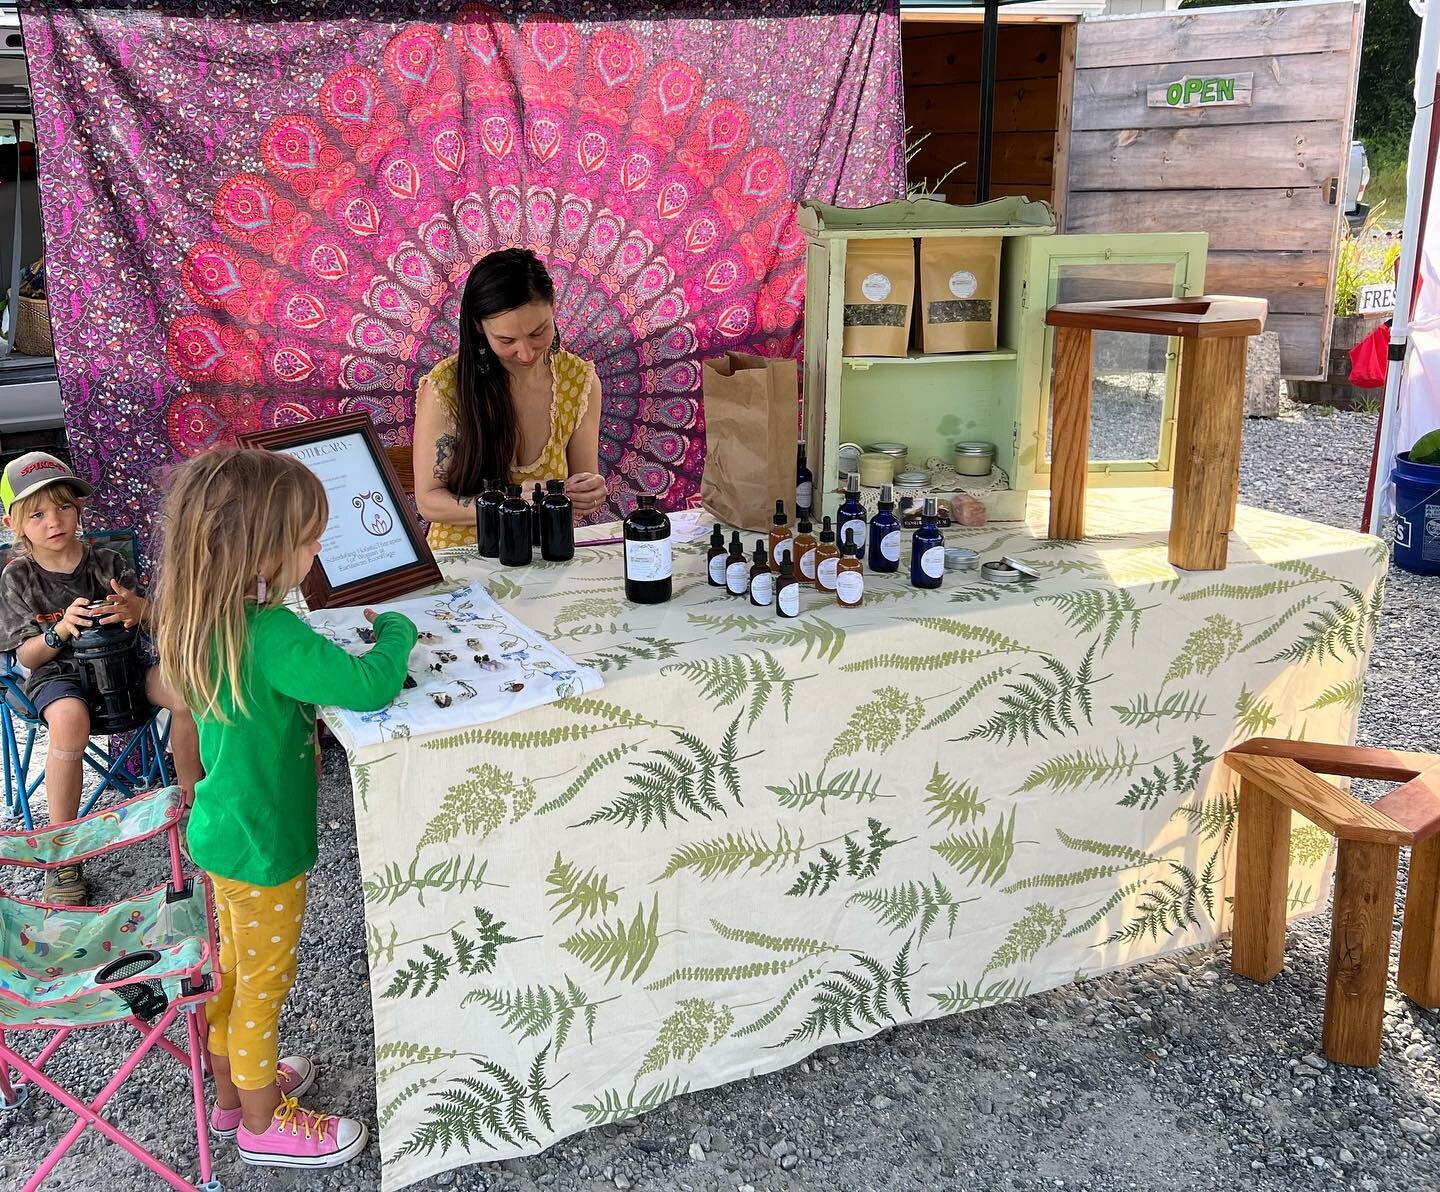 Got out of the village today to vend at the Old Fort Farmers Market.

As an introvert who loves being home and living in the forest, it&rsquo;s nice to get out of the vortex of @earthavenecovillage and see some new faces 💕

Downside is that most of 